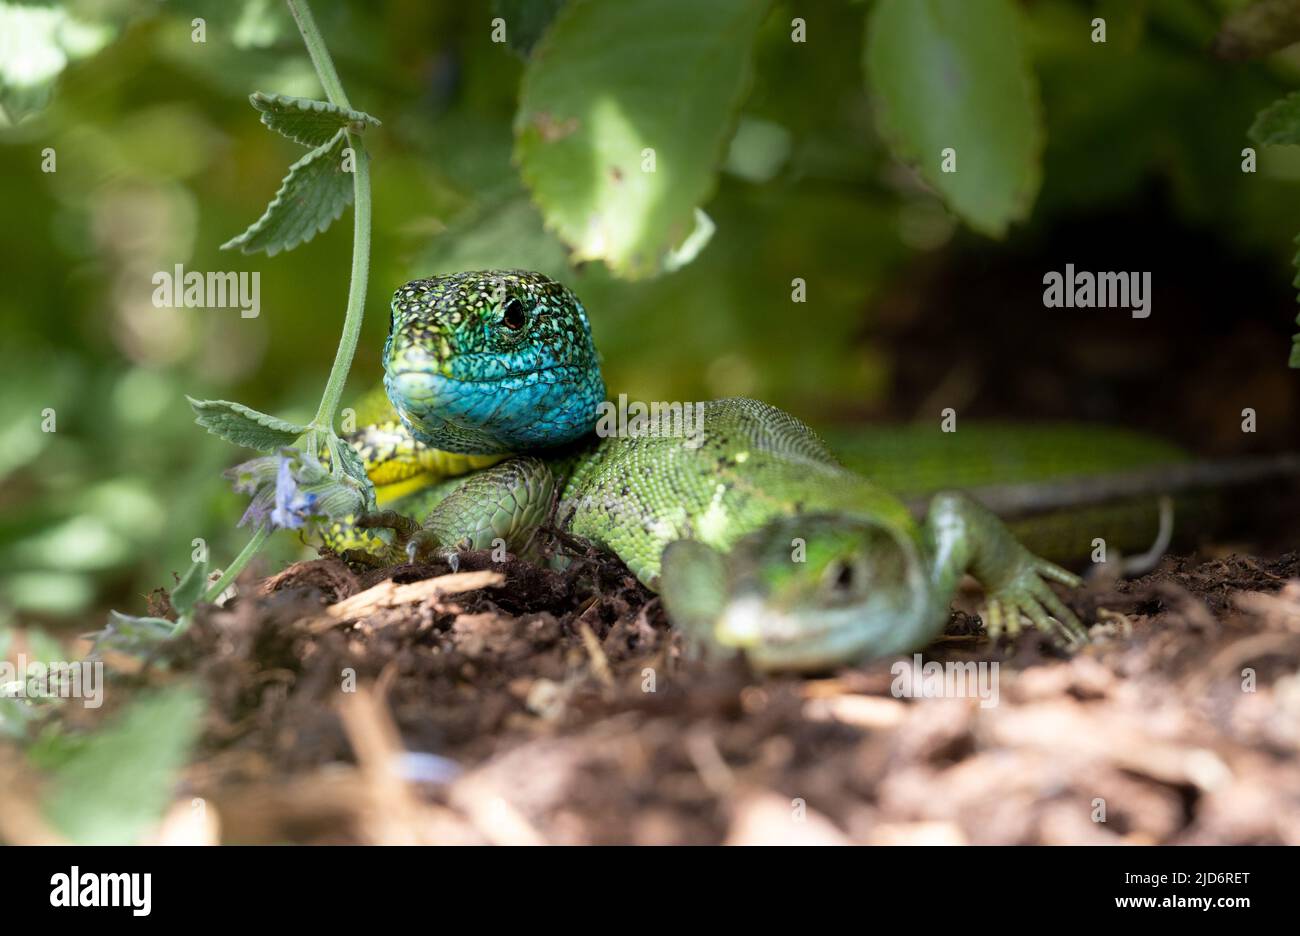 Close-up of a male and female green lizard couple (Lacerta bilineata or Lacerta vivipara, Smaragdeidechse) looking into the camera. Focus on male liza Stock Photo